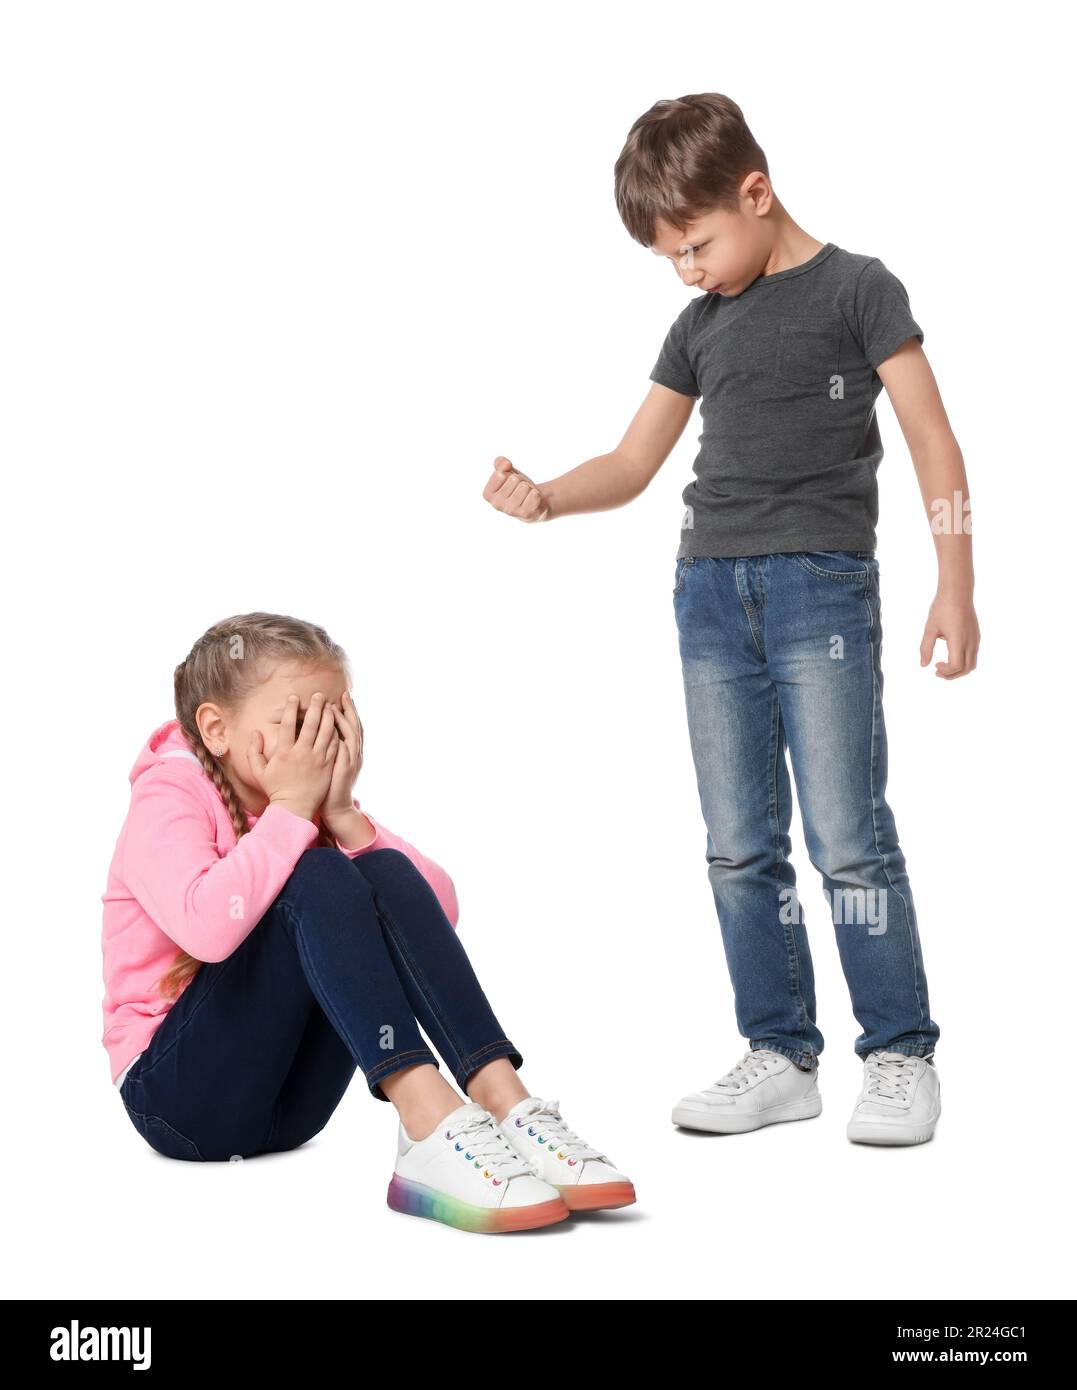 Boy with clenched fist looking at scared girl on white background. Children's bullying Stock Photo